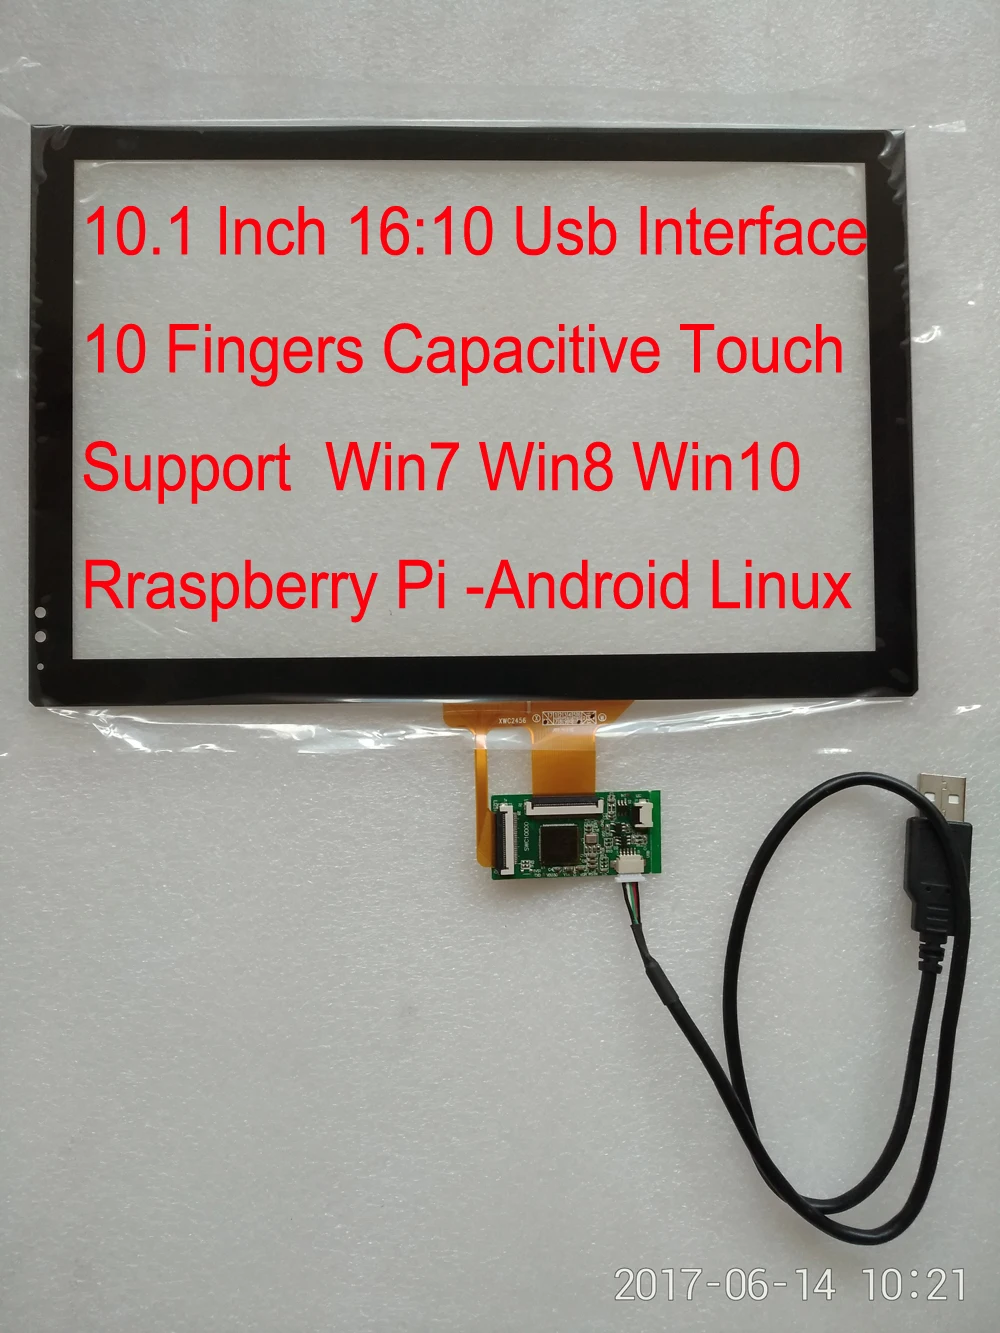 

10.1 Inch Usb Interface Capacitive Touch Support WIN7 WIN8 WIN10 Raspberry Pi Android Linux For Carpc Diy Tablet Pc Industrial c